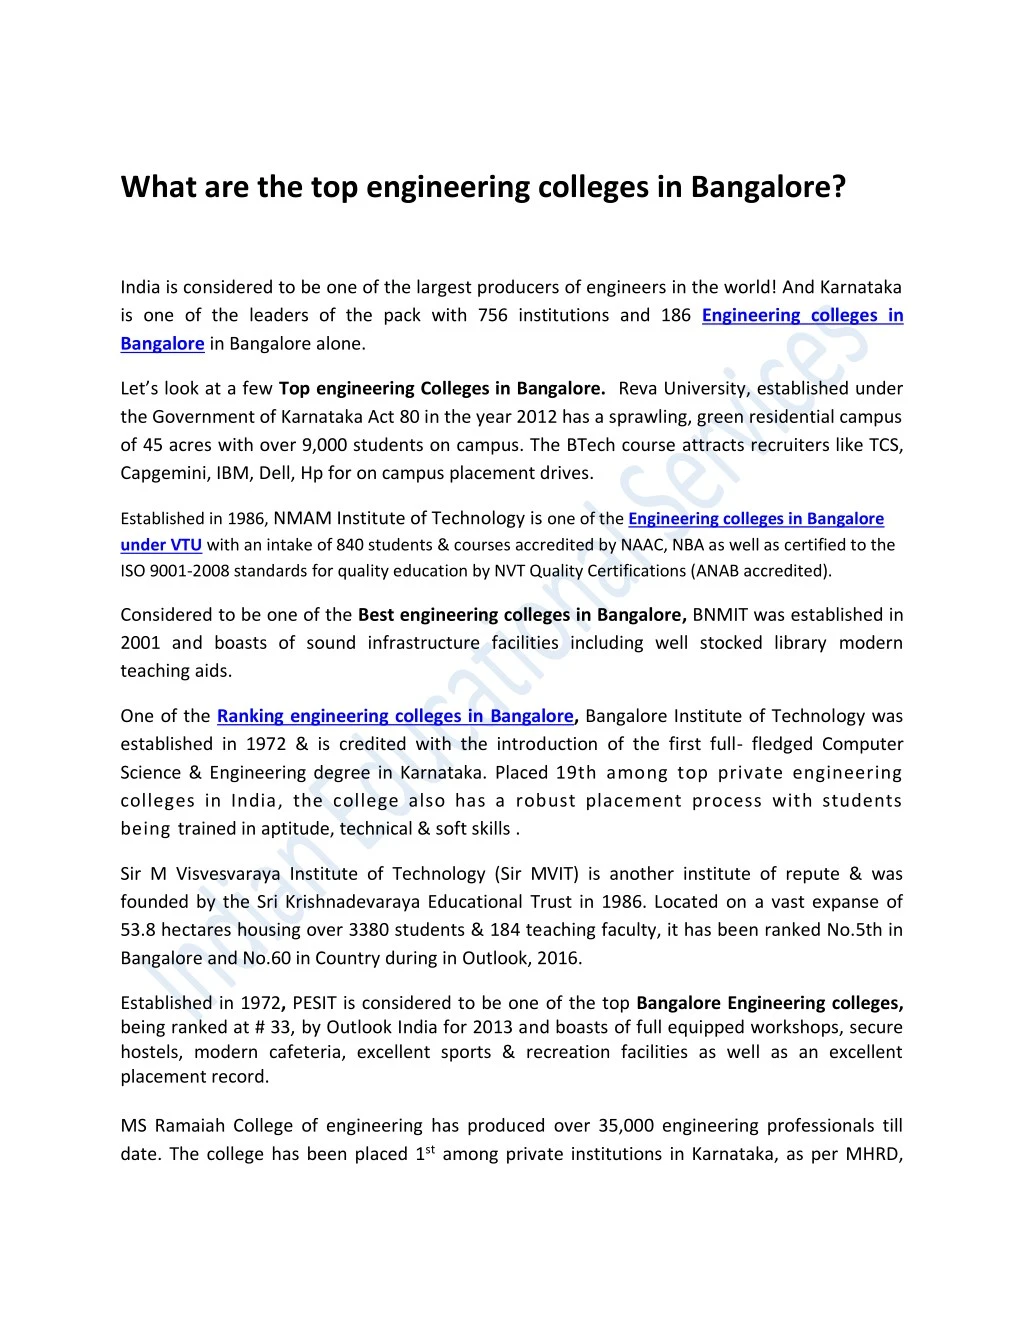 what are the top engineering colleges in bangalore